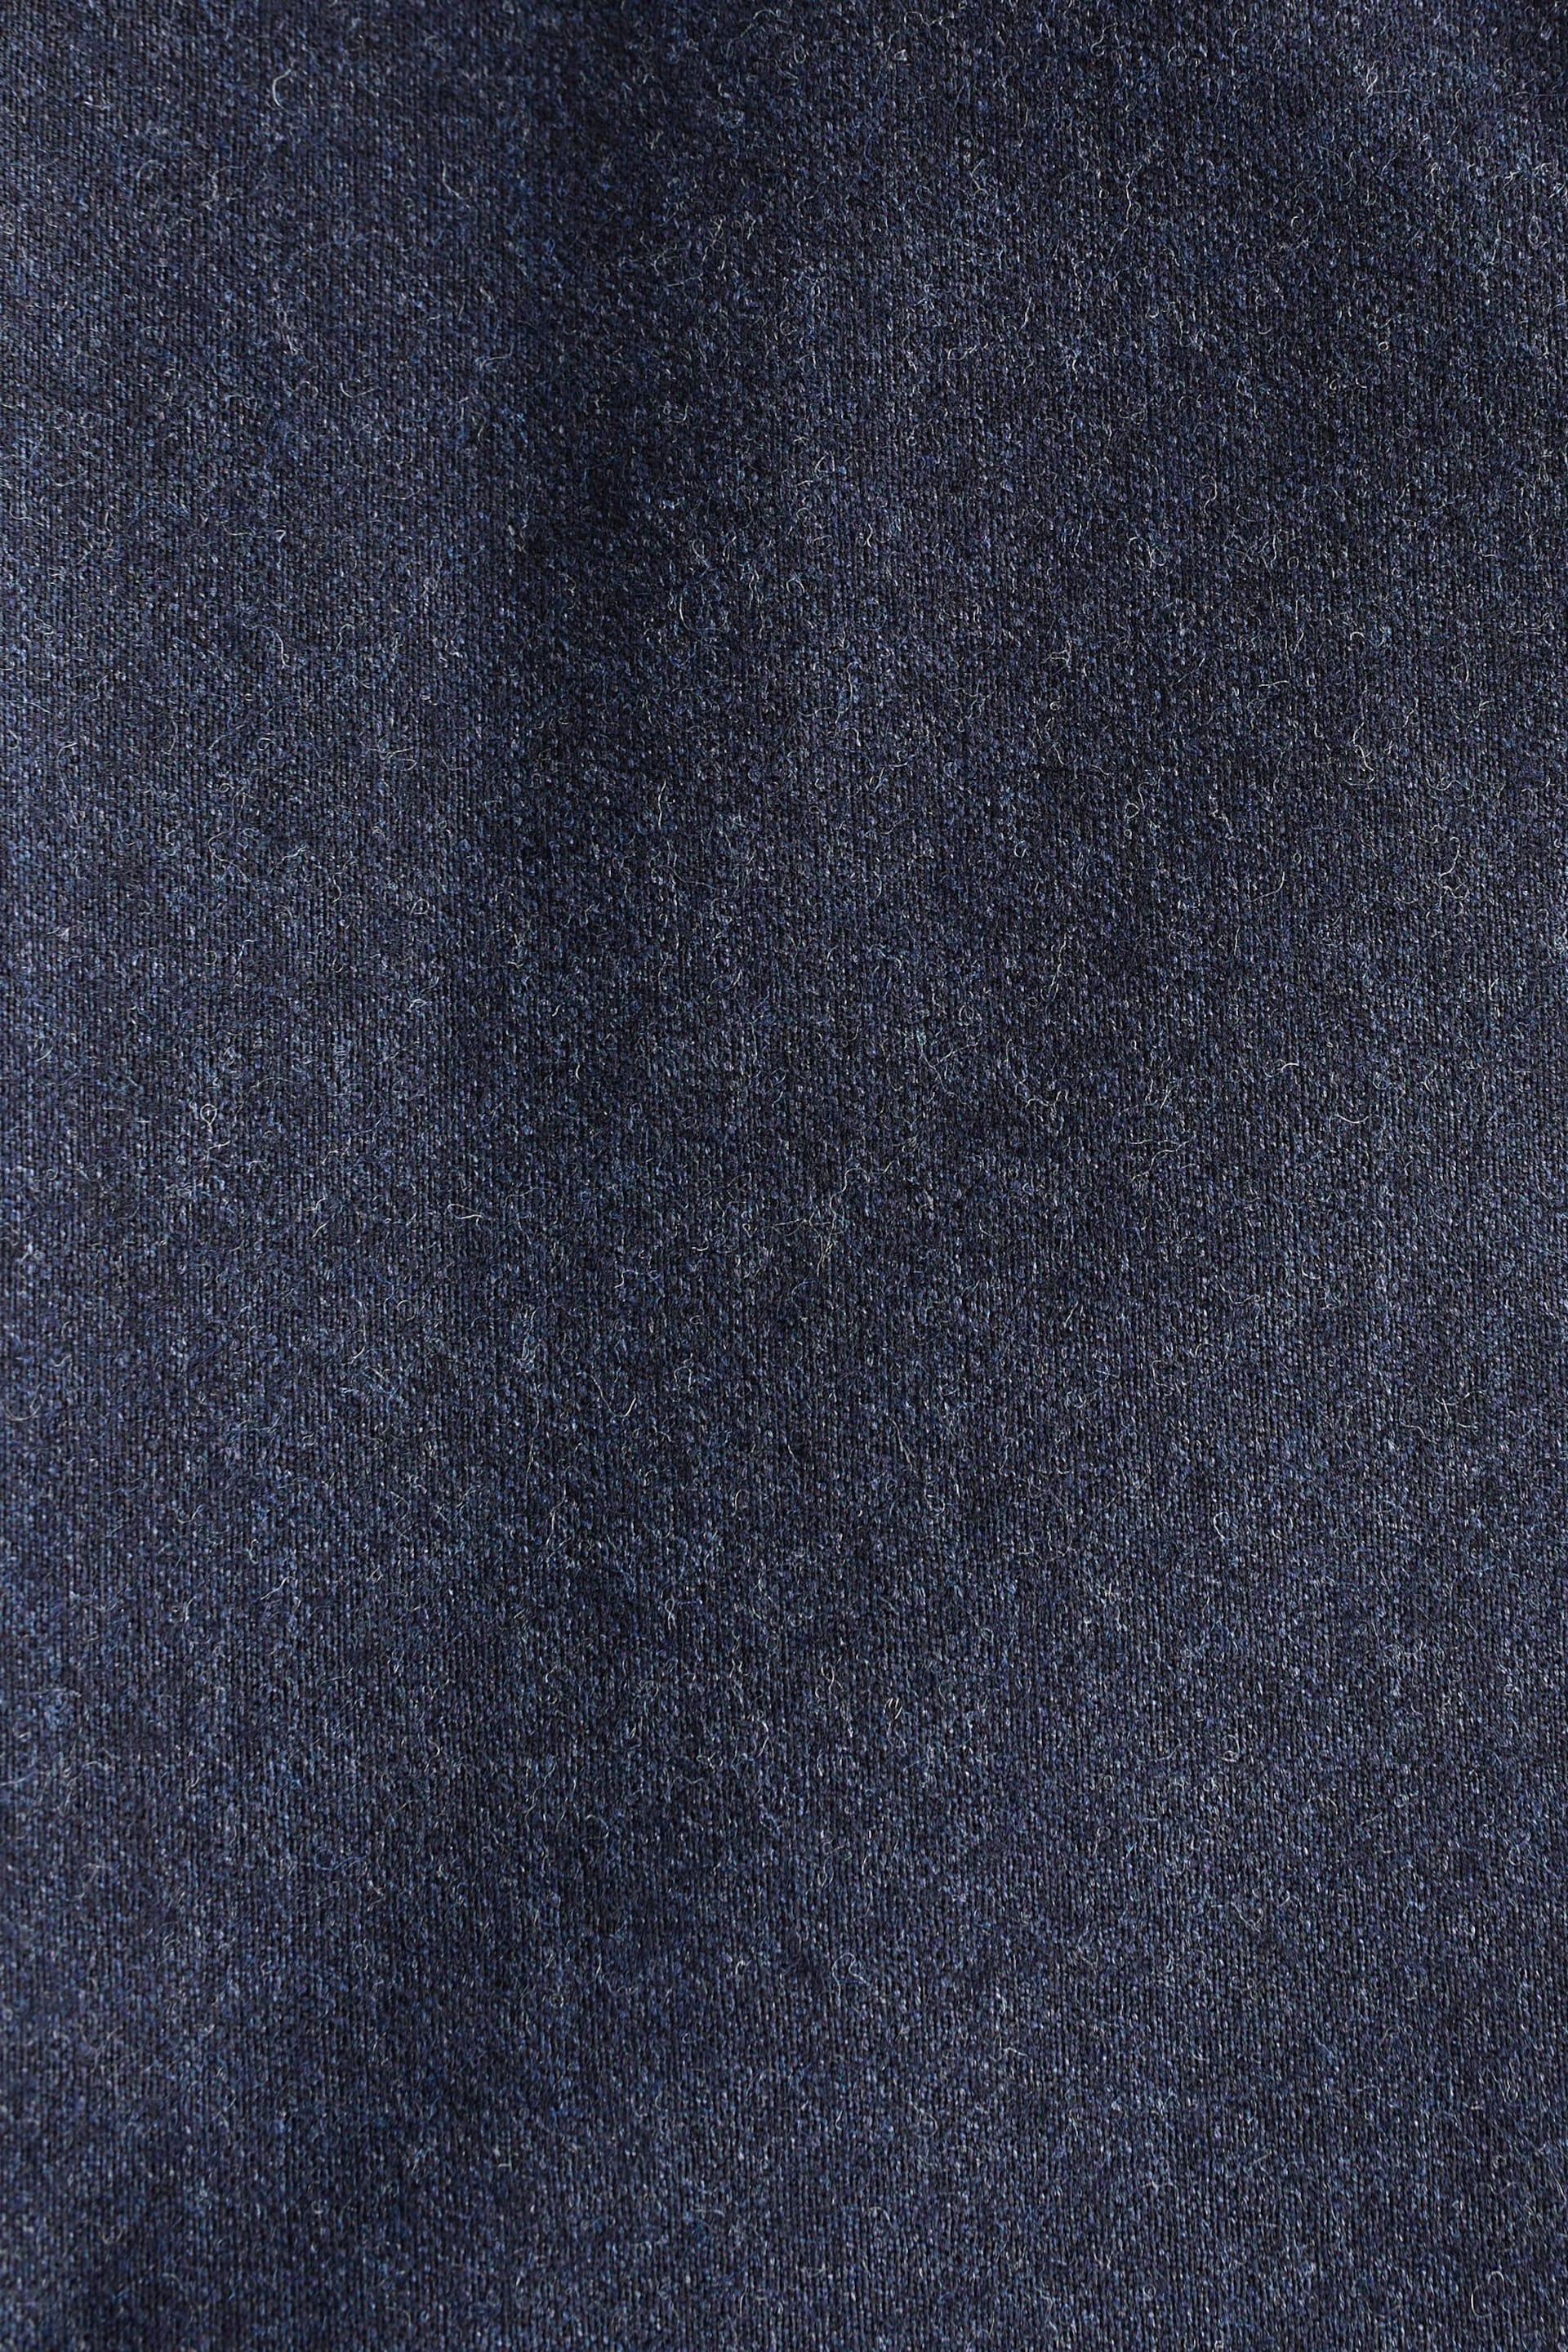 Blue Tailored Fit Signature Barberis Italian Fabric Wool Flannel Suit Trousers - Image 10 of 10